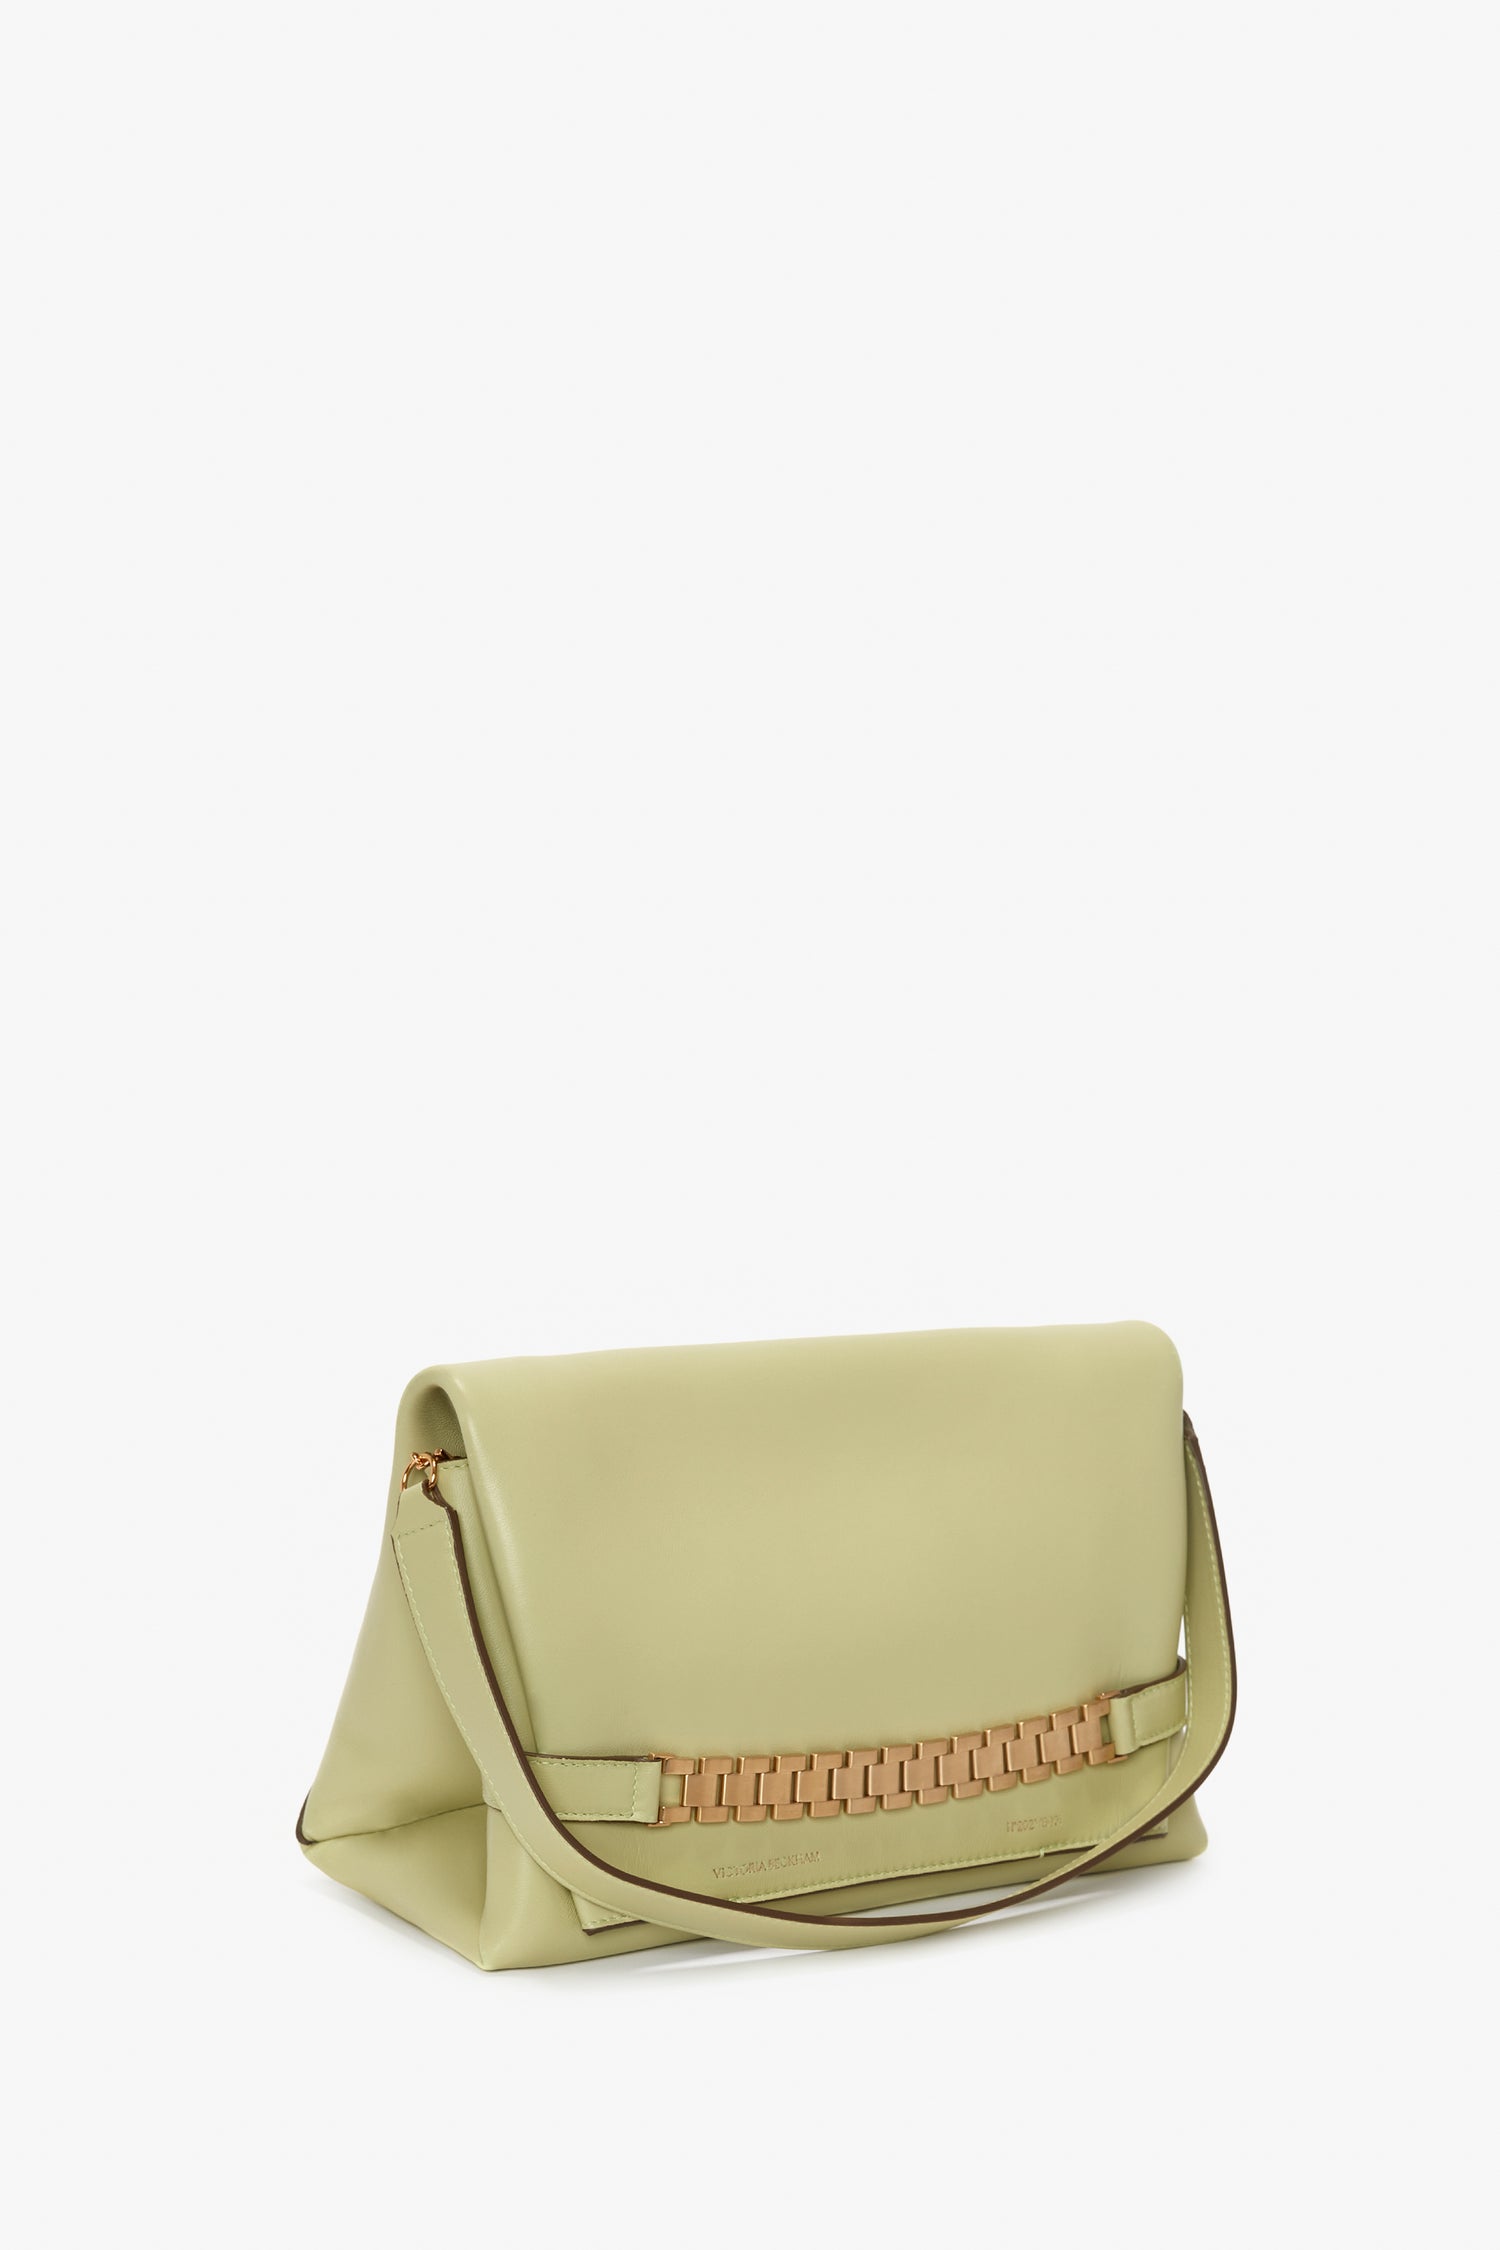 Light green Victoria Beckham leather shoulder bag with a fold-over flap and a gold chain detail, displayed against a white background.